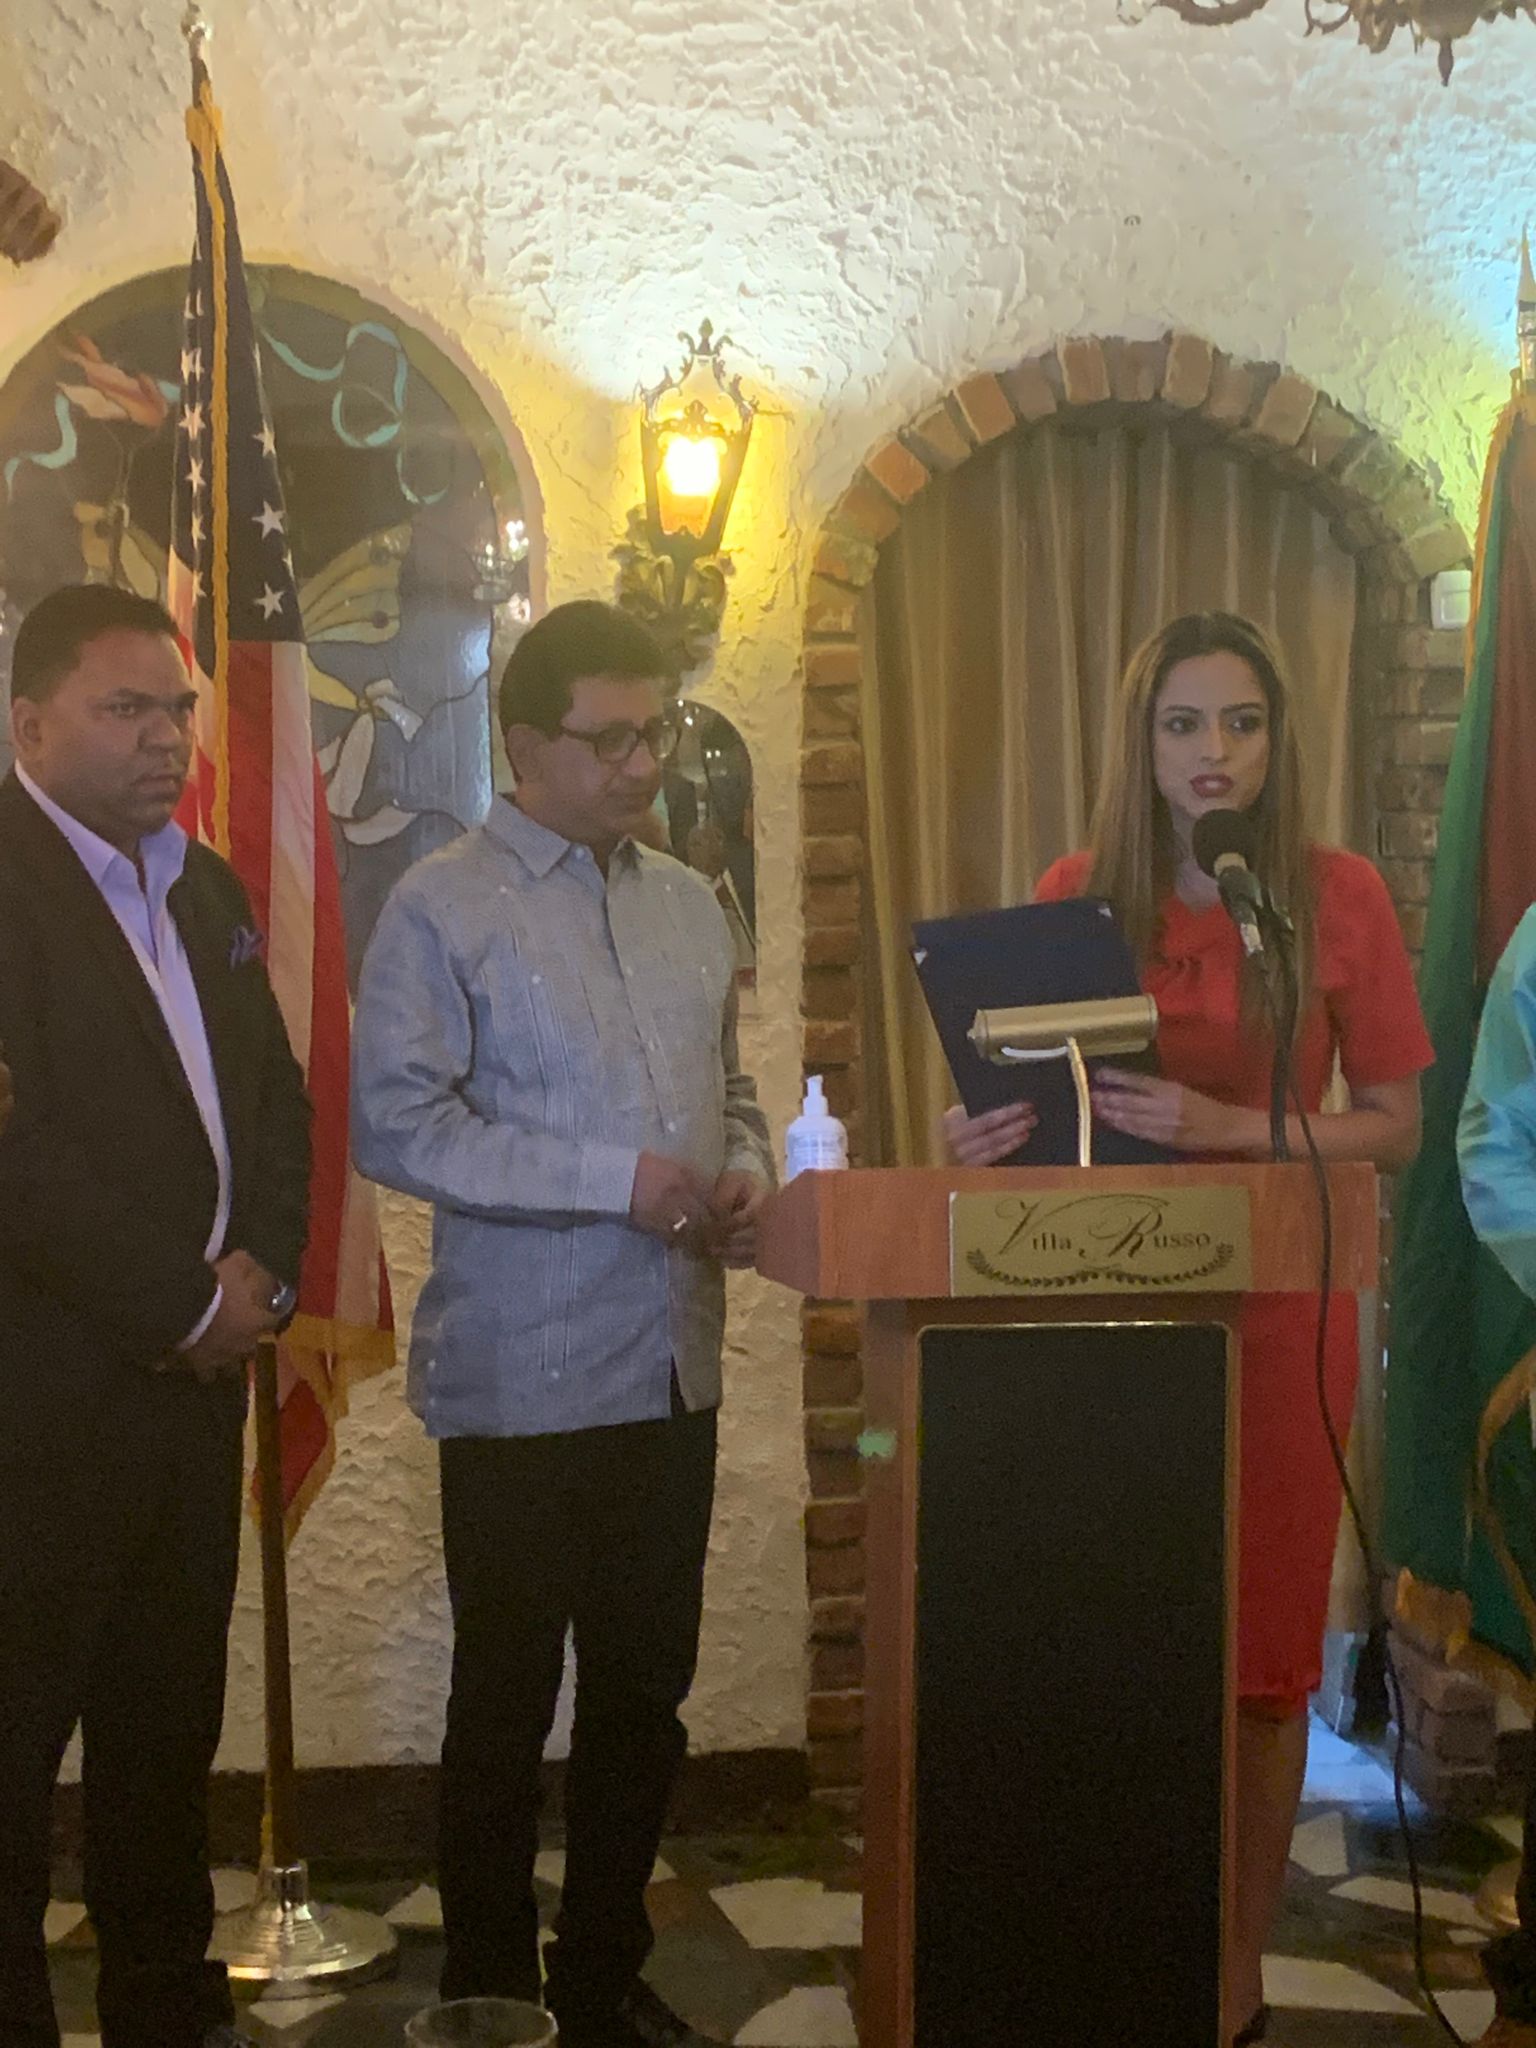 Attorney-General Anil Nandlall listens to Jenifer
Rajkumar of the New York State Assembly before
being presented with a citation for his role in protecting
the rights of Guyanese. Romeo Hitlal, at
left, looks on